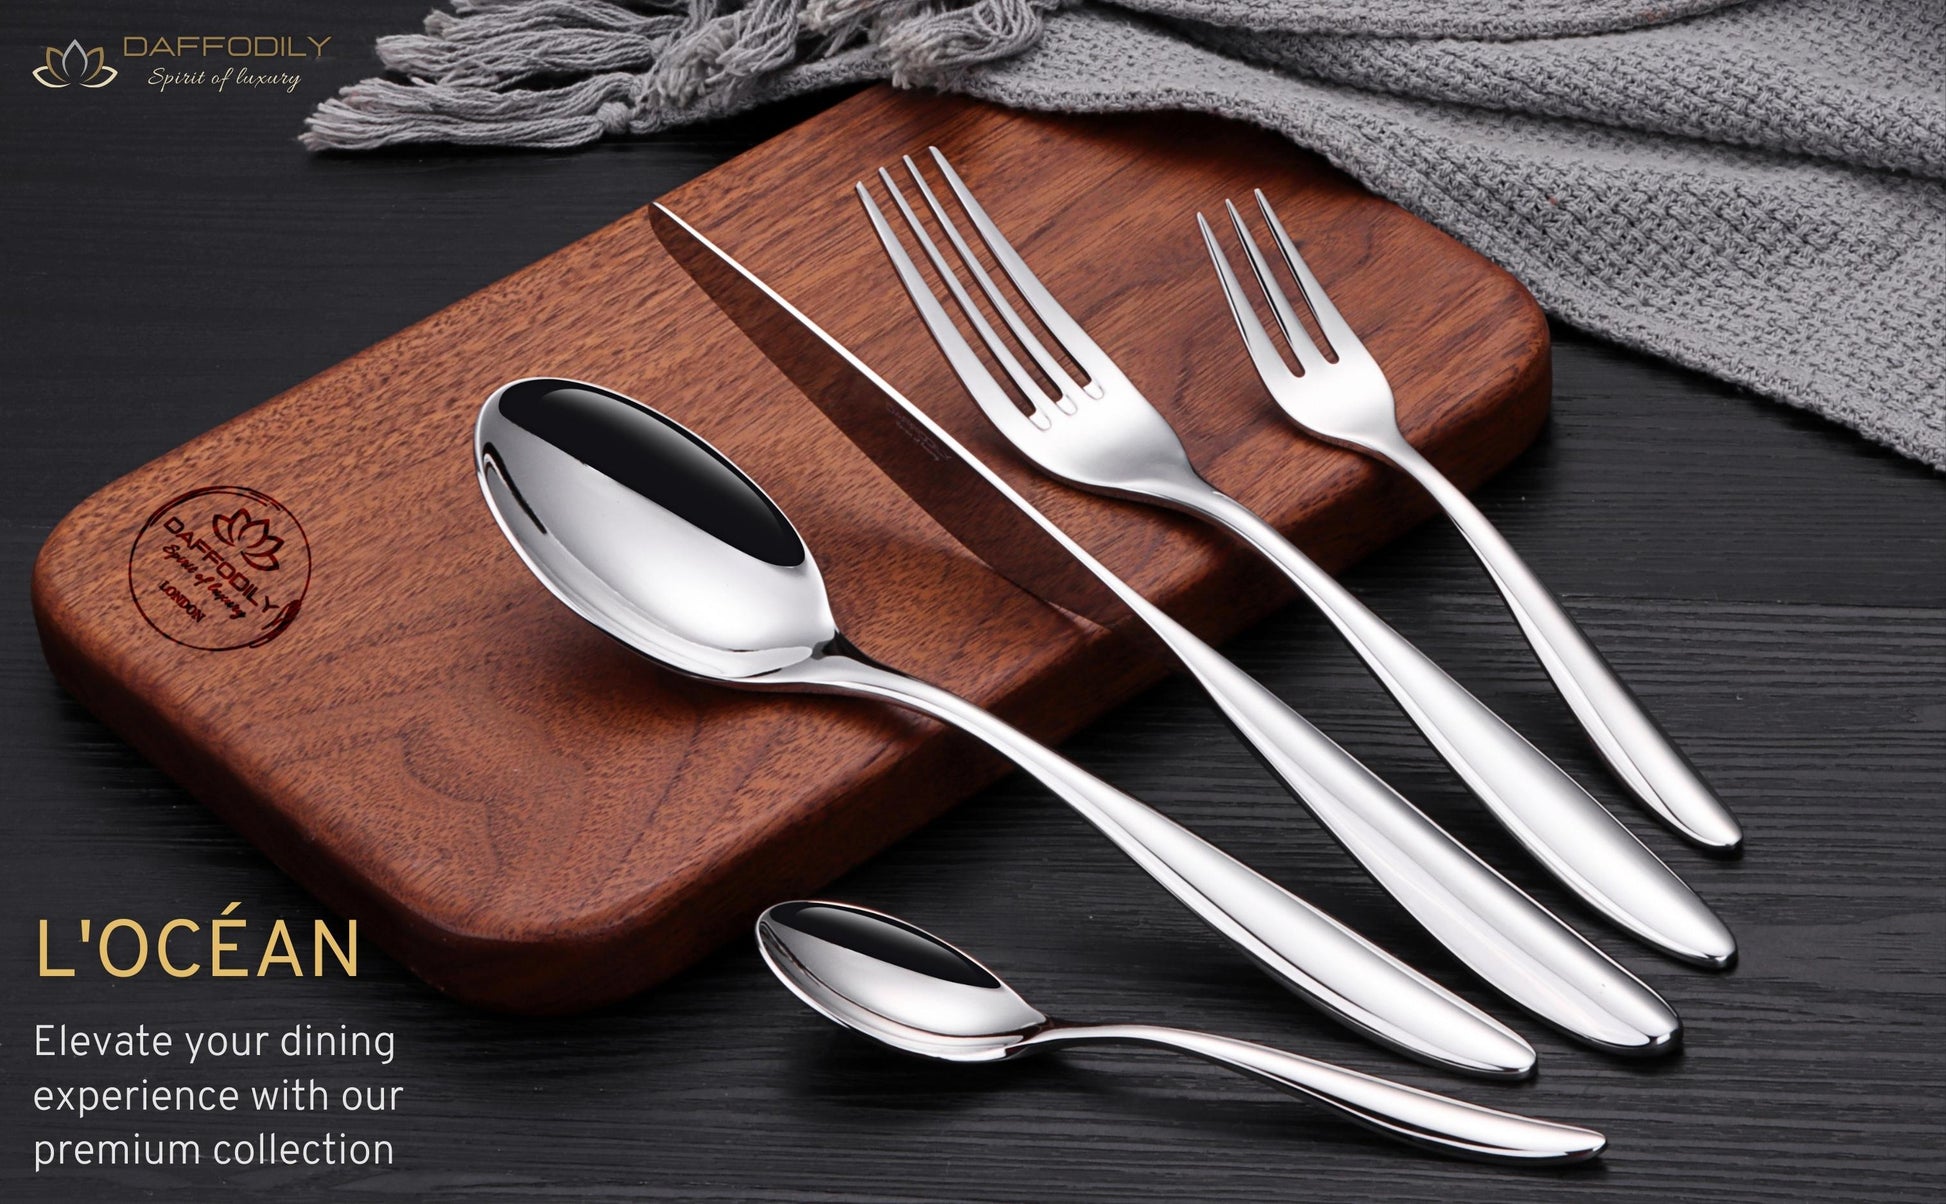 Elegant silver cutlery set for a sophisticated dining experience